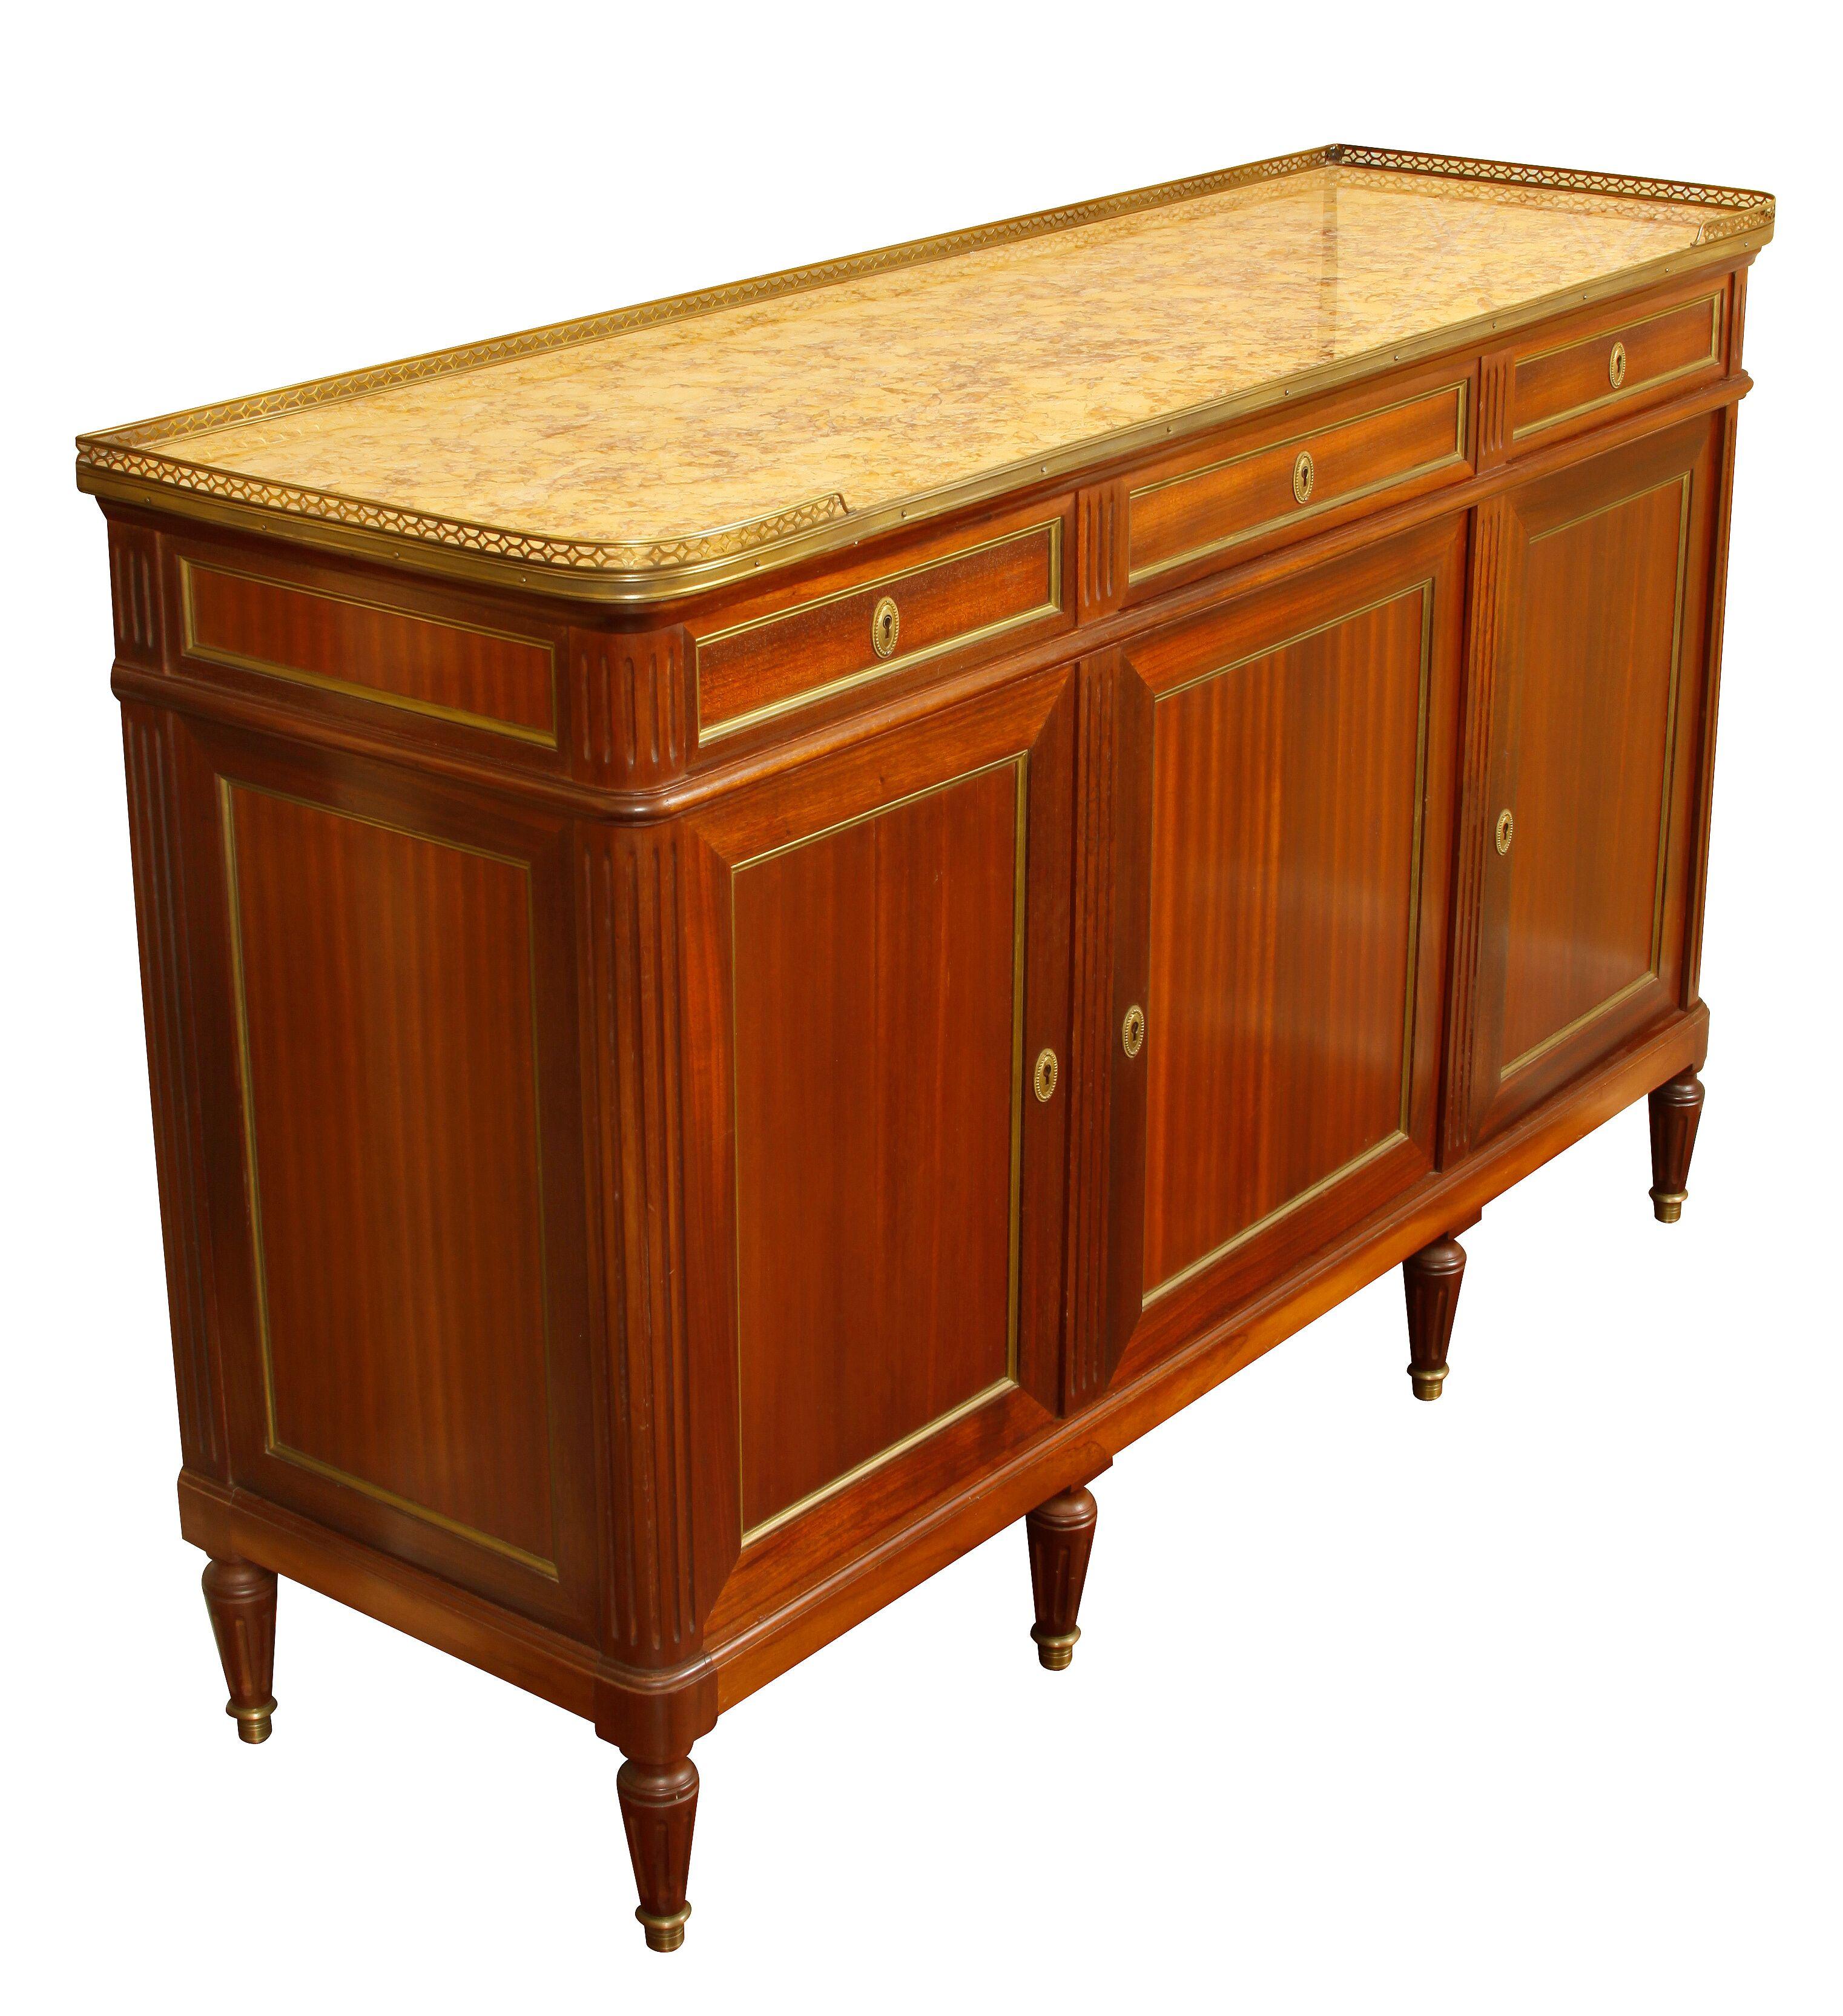 French mahogany Louis XVI style sideboard, circa 1940
Three doors with three slim drawers with bronze accents, marble top and bronze gallery.